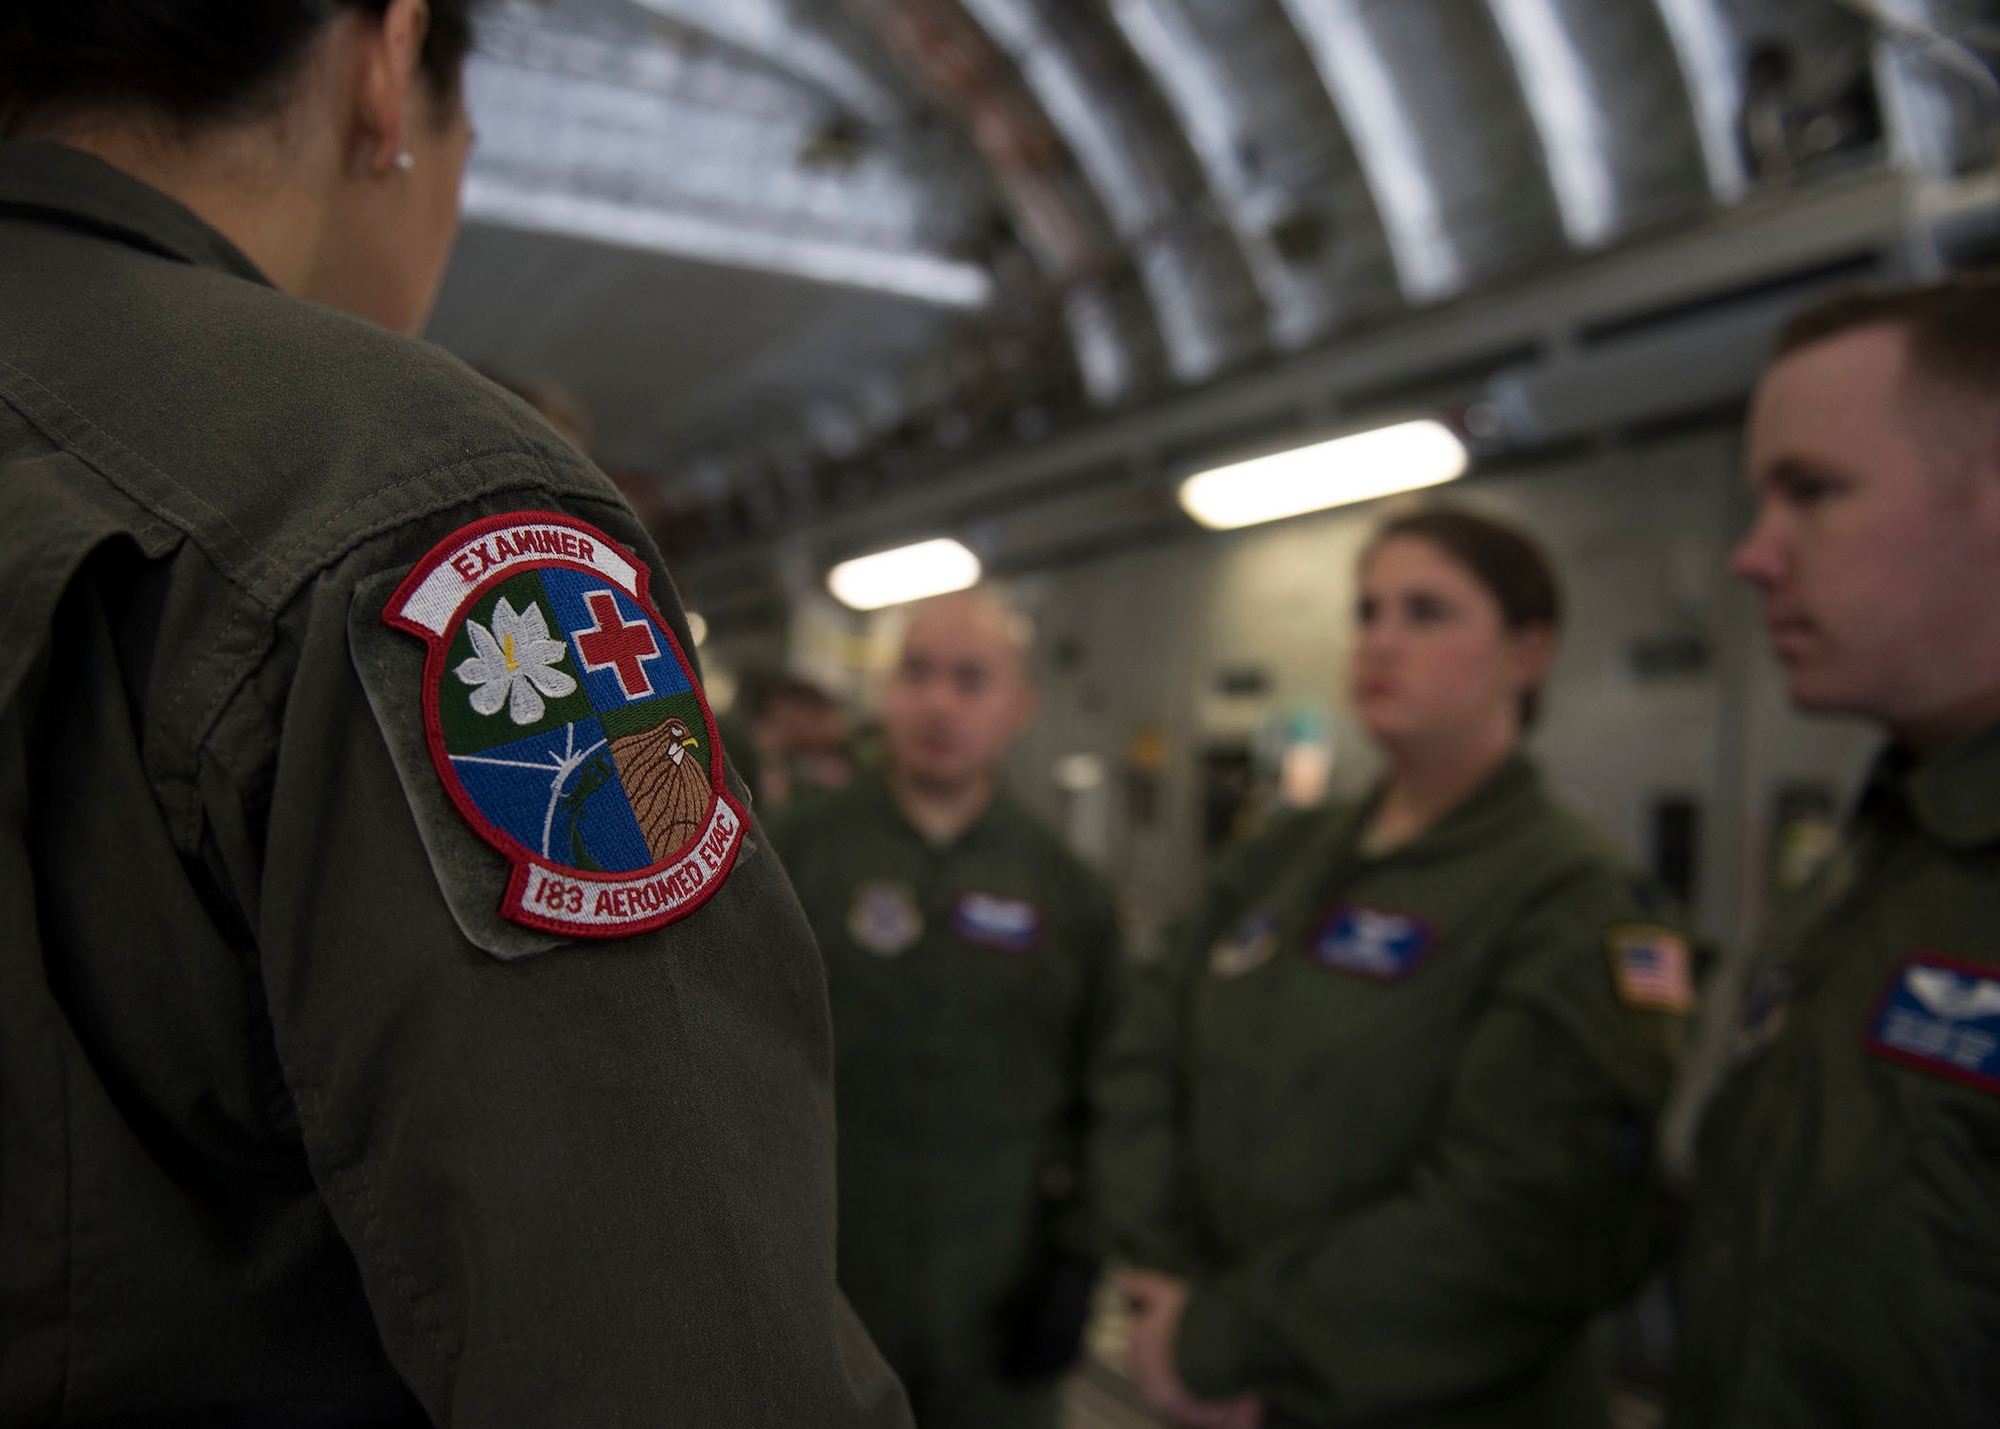 A 183rd Air Evacuation Squadron patch sits on an Airman's flight suit. in front of three Airmen.